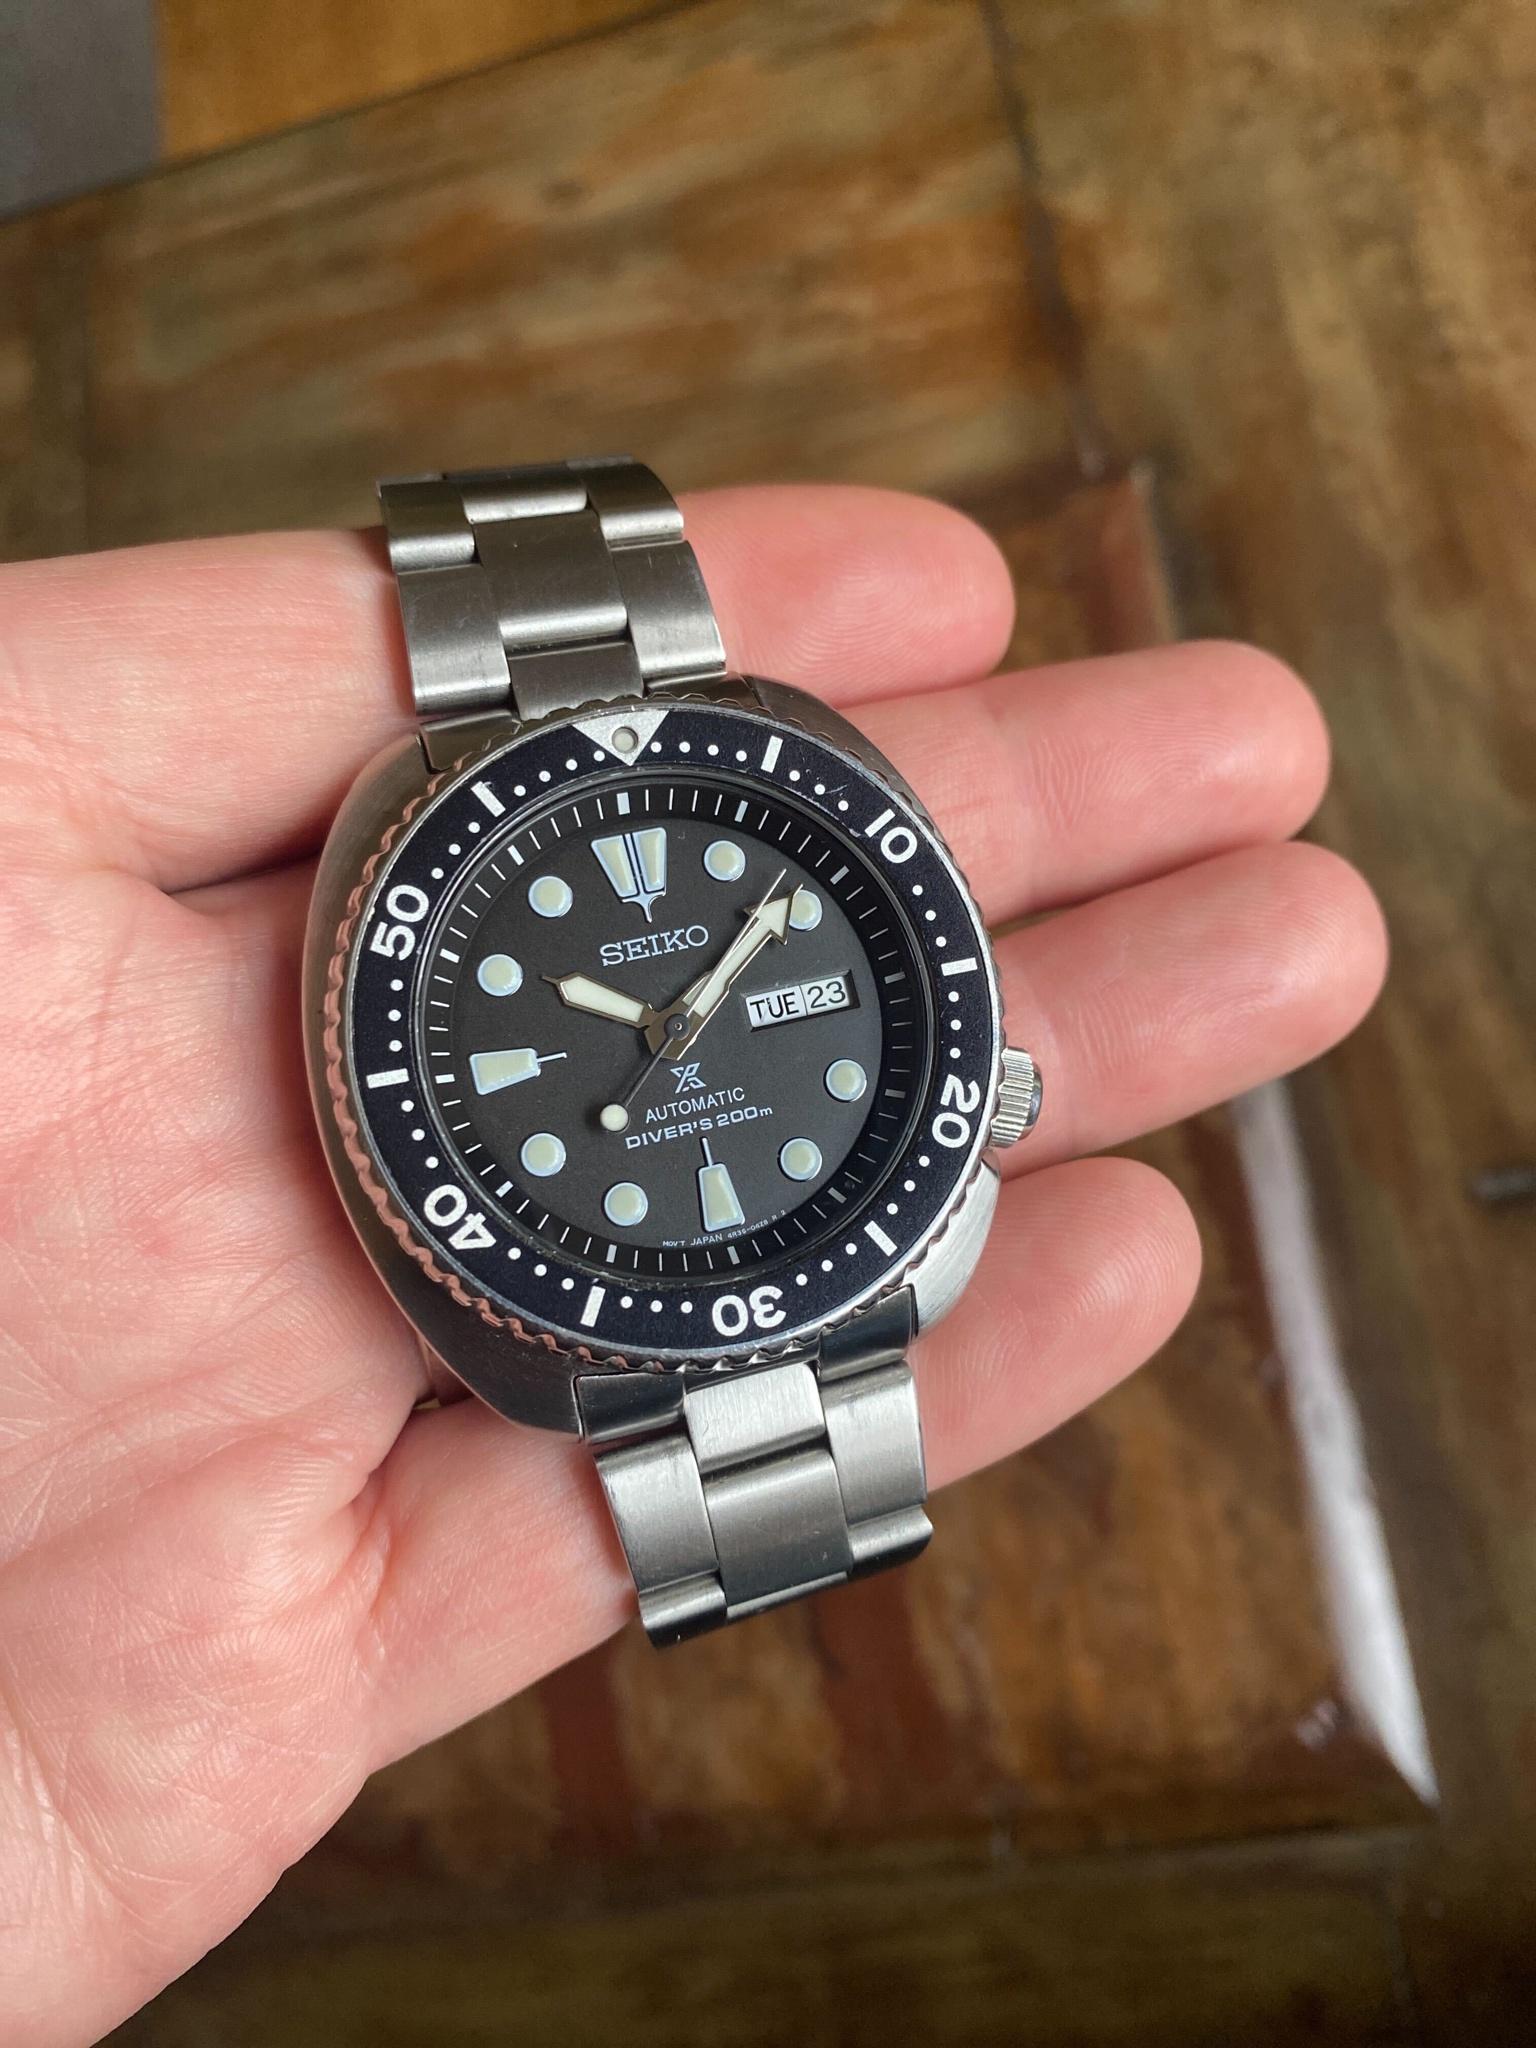 WTS] Seiko Turtle SRP777 on Strapcode oyster, plus OEM bracelet